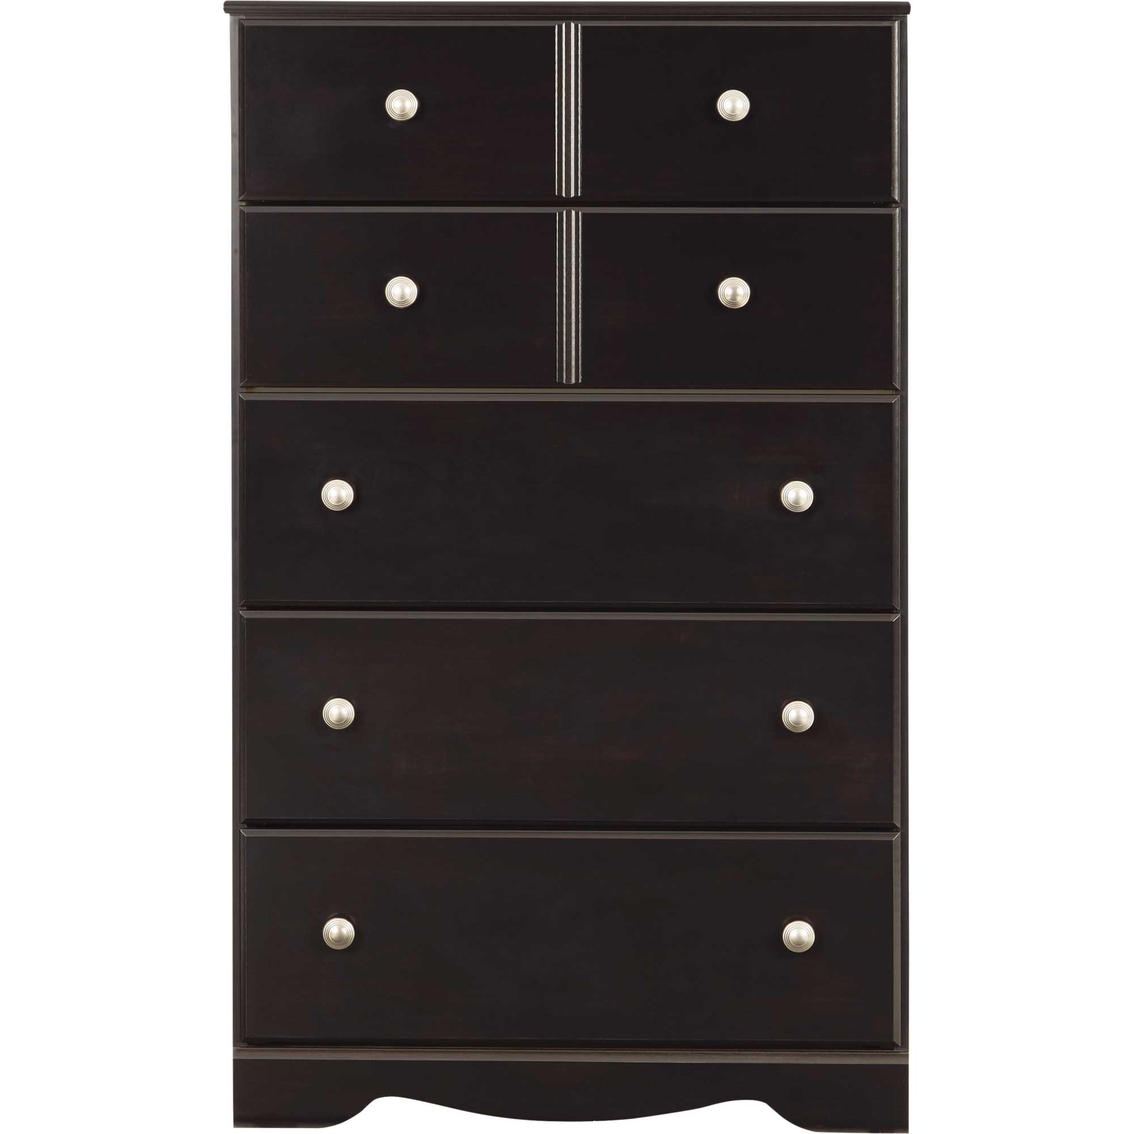 Signature Design by Ashley Mirlotown 5 Drawer Chest - Image 2 of 8